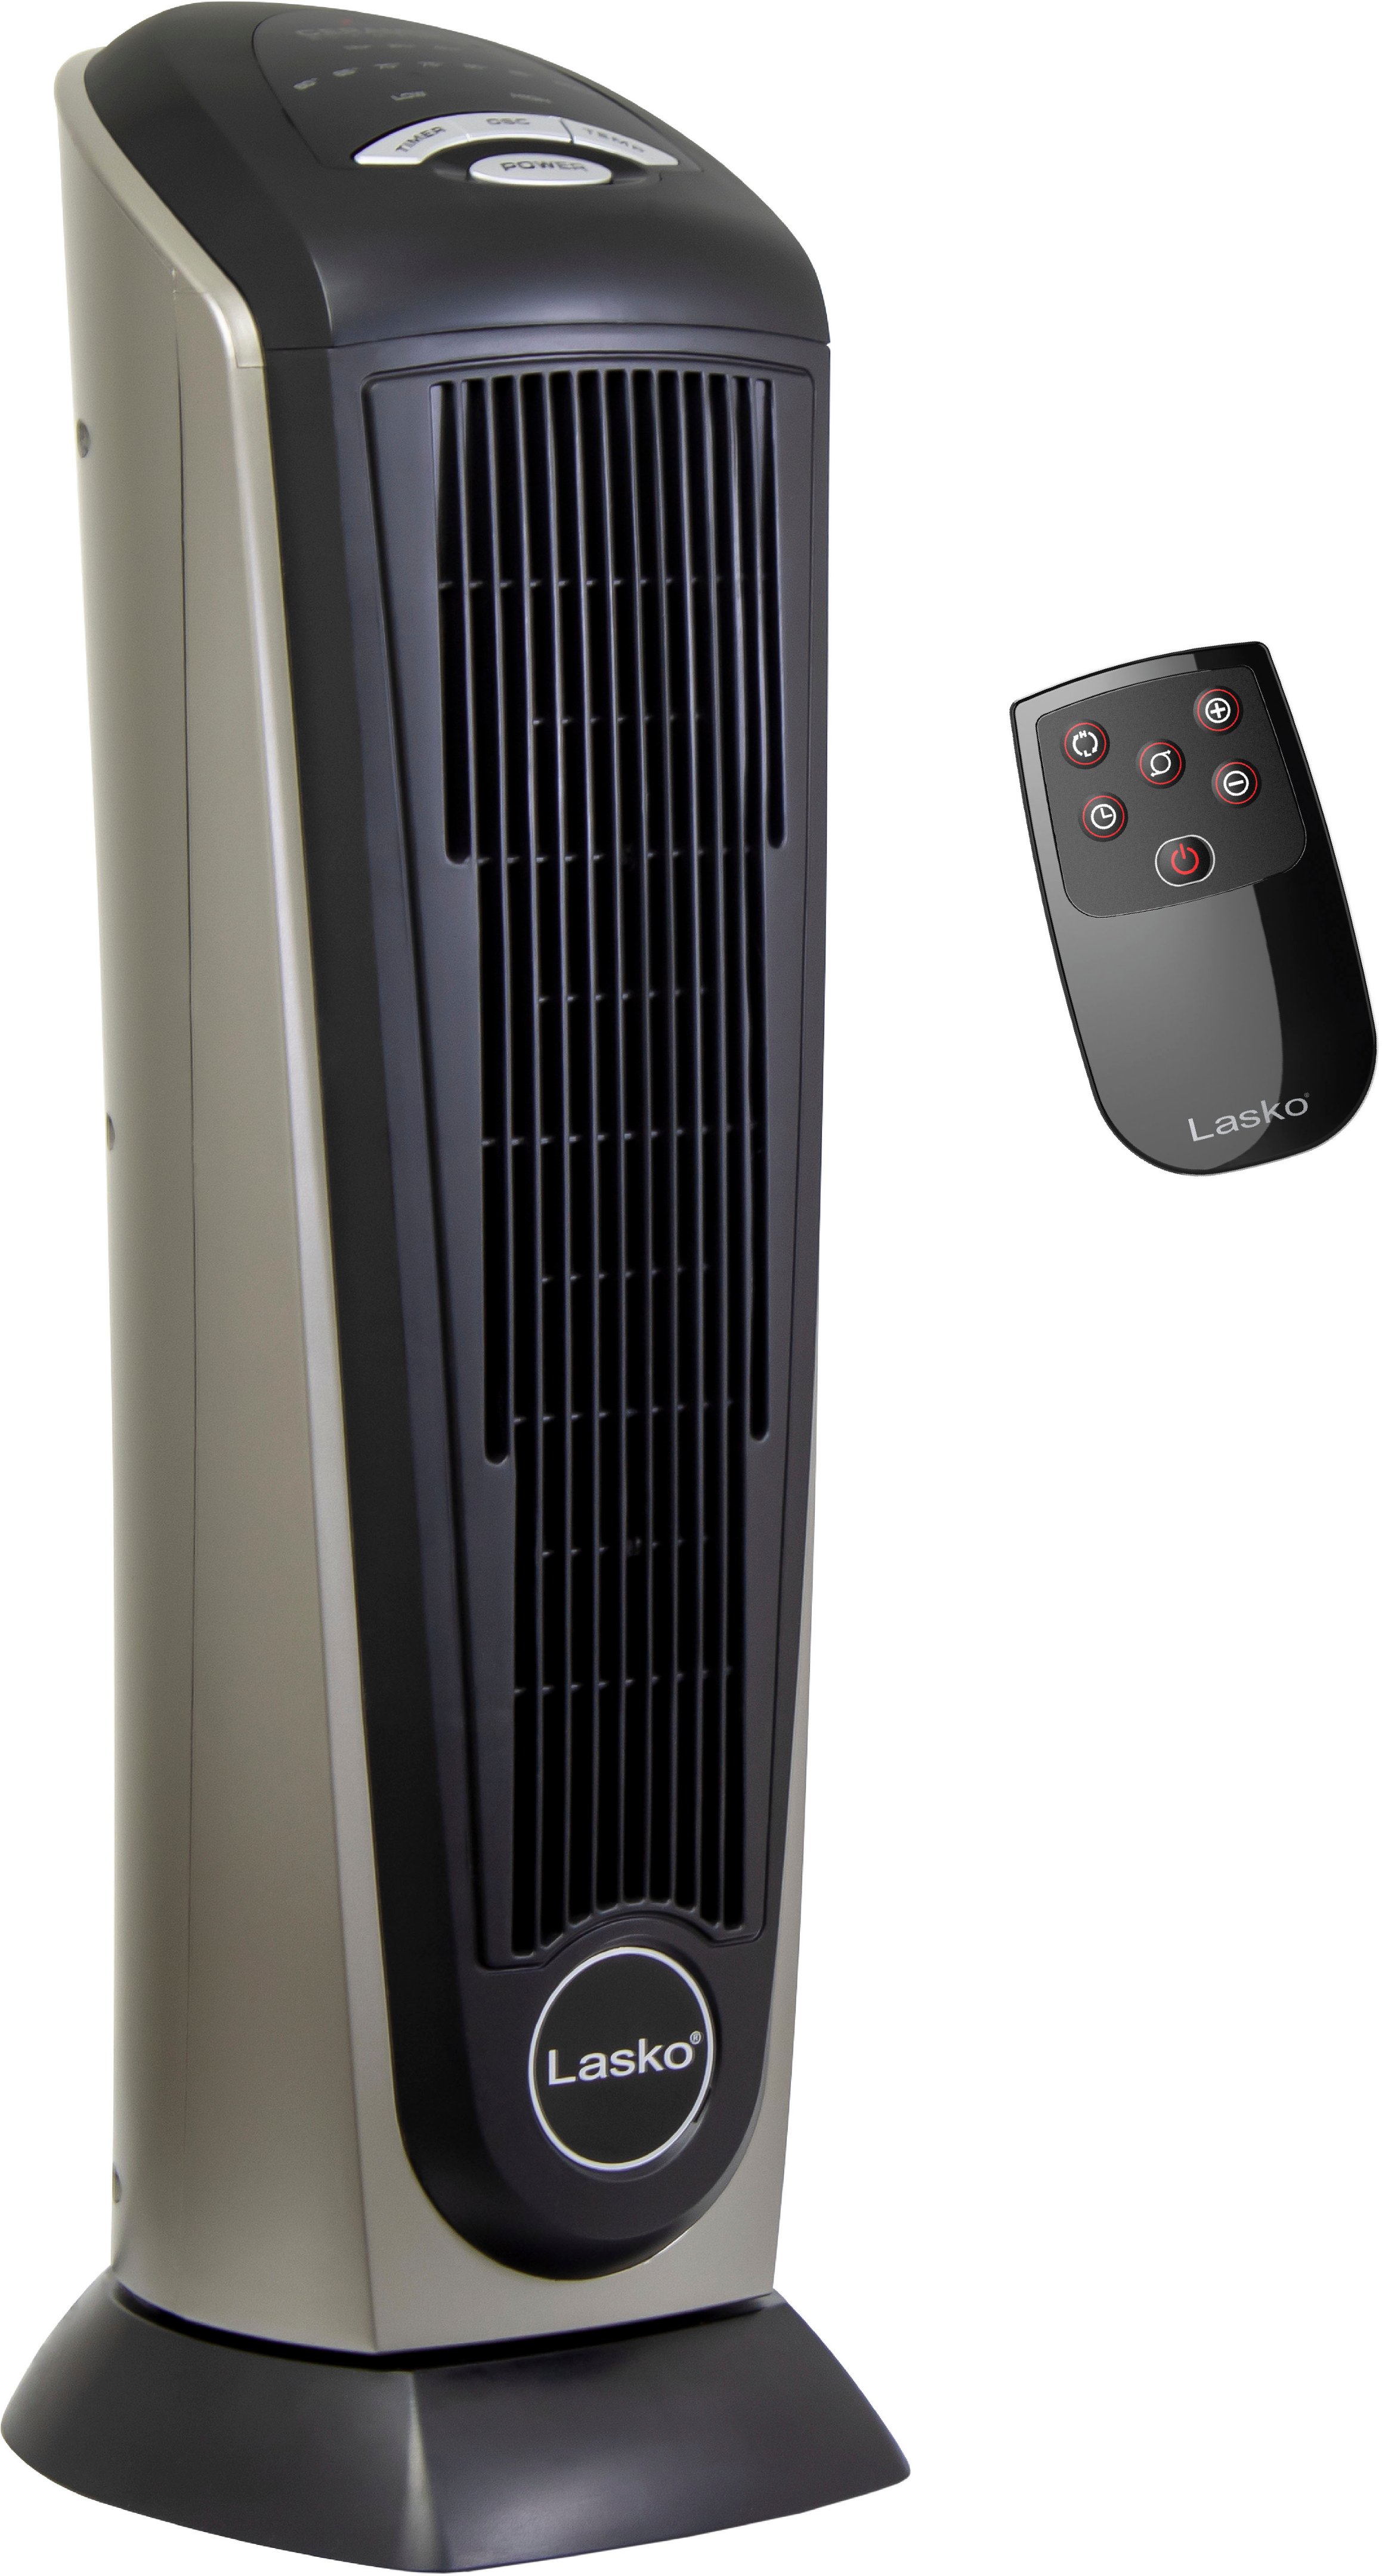 Angle View: Lasko - Portable Ceramic Tower Space Heater with Remote Control - Black/Silver